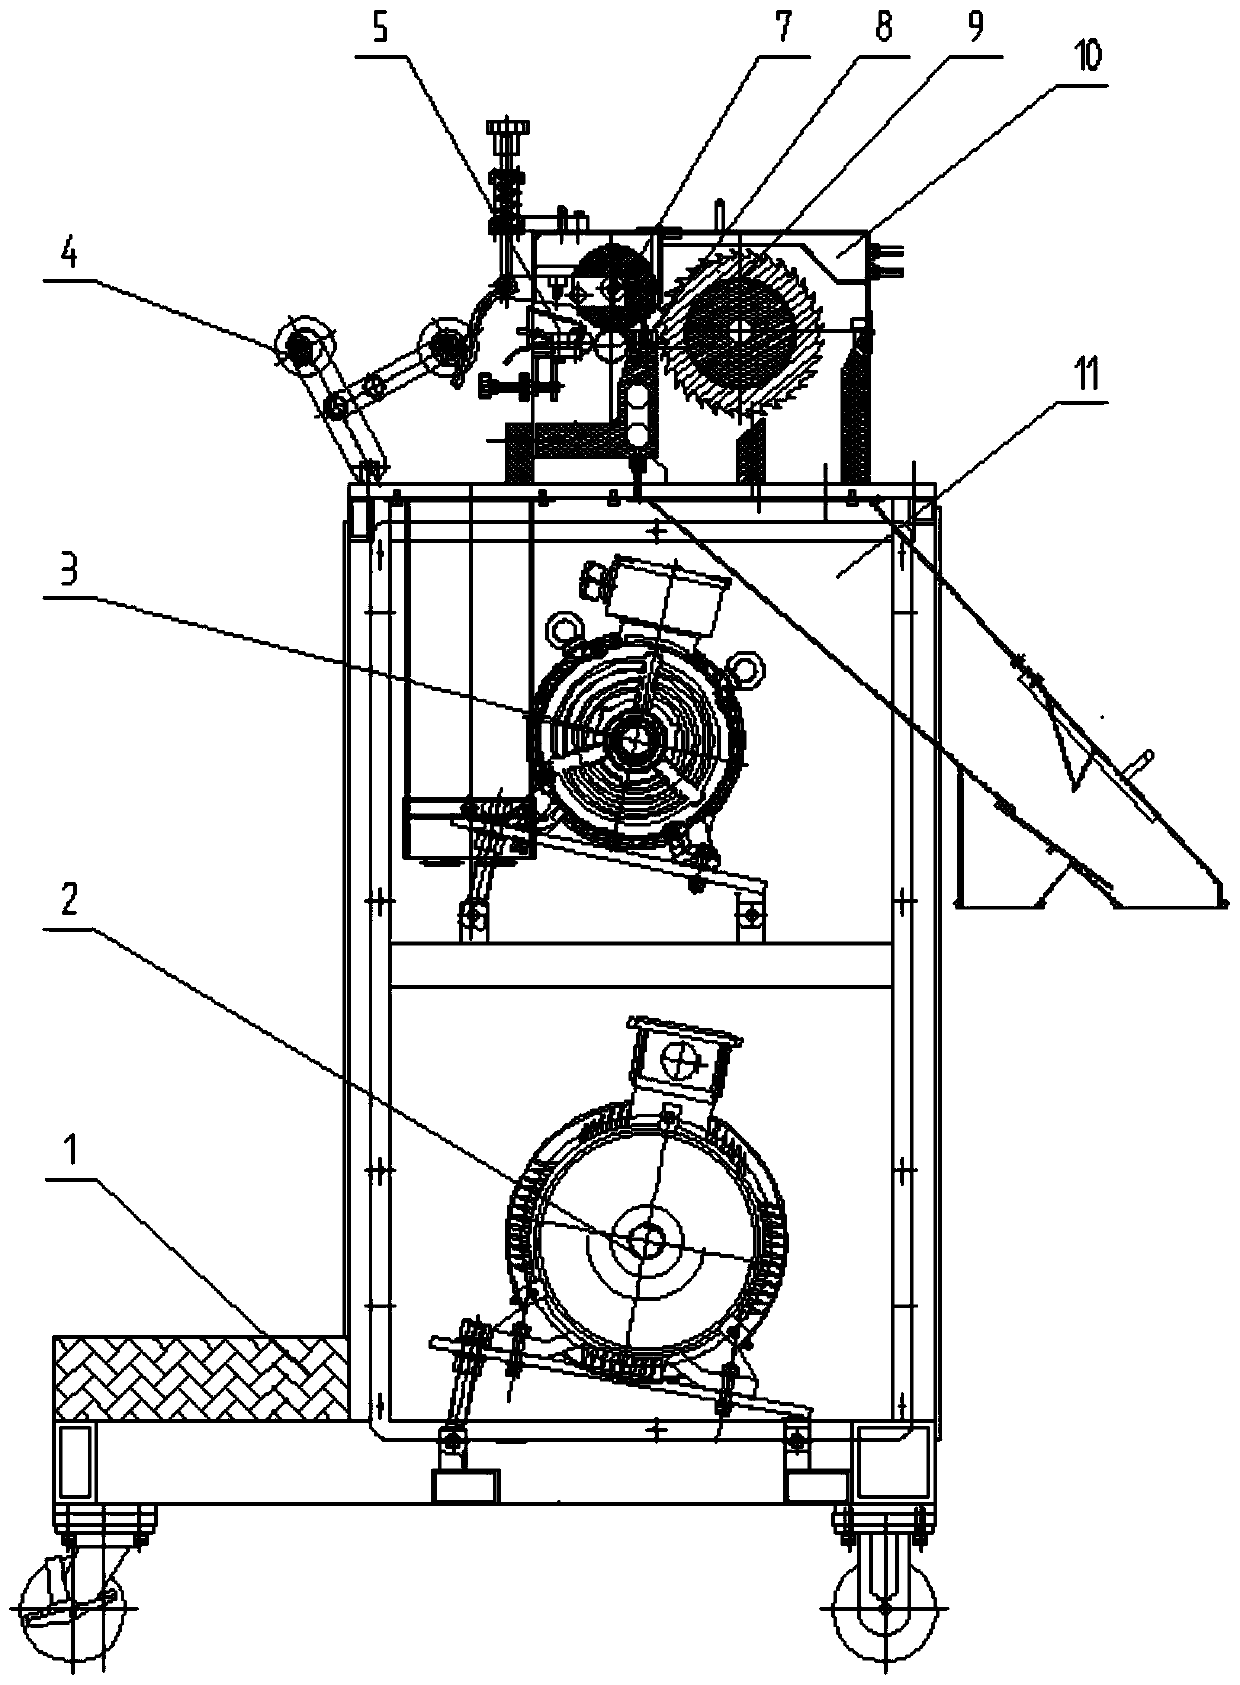 Water-cooled bracing and dicing machine